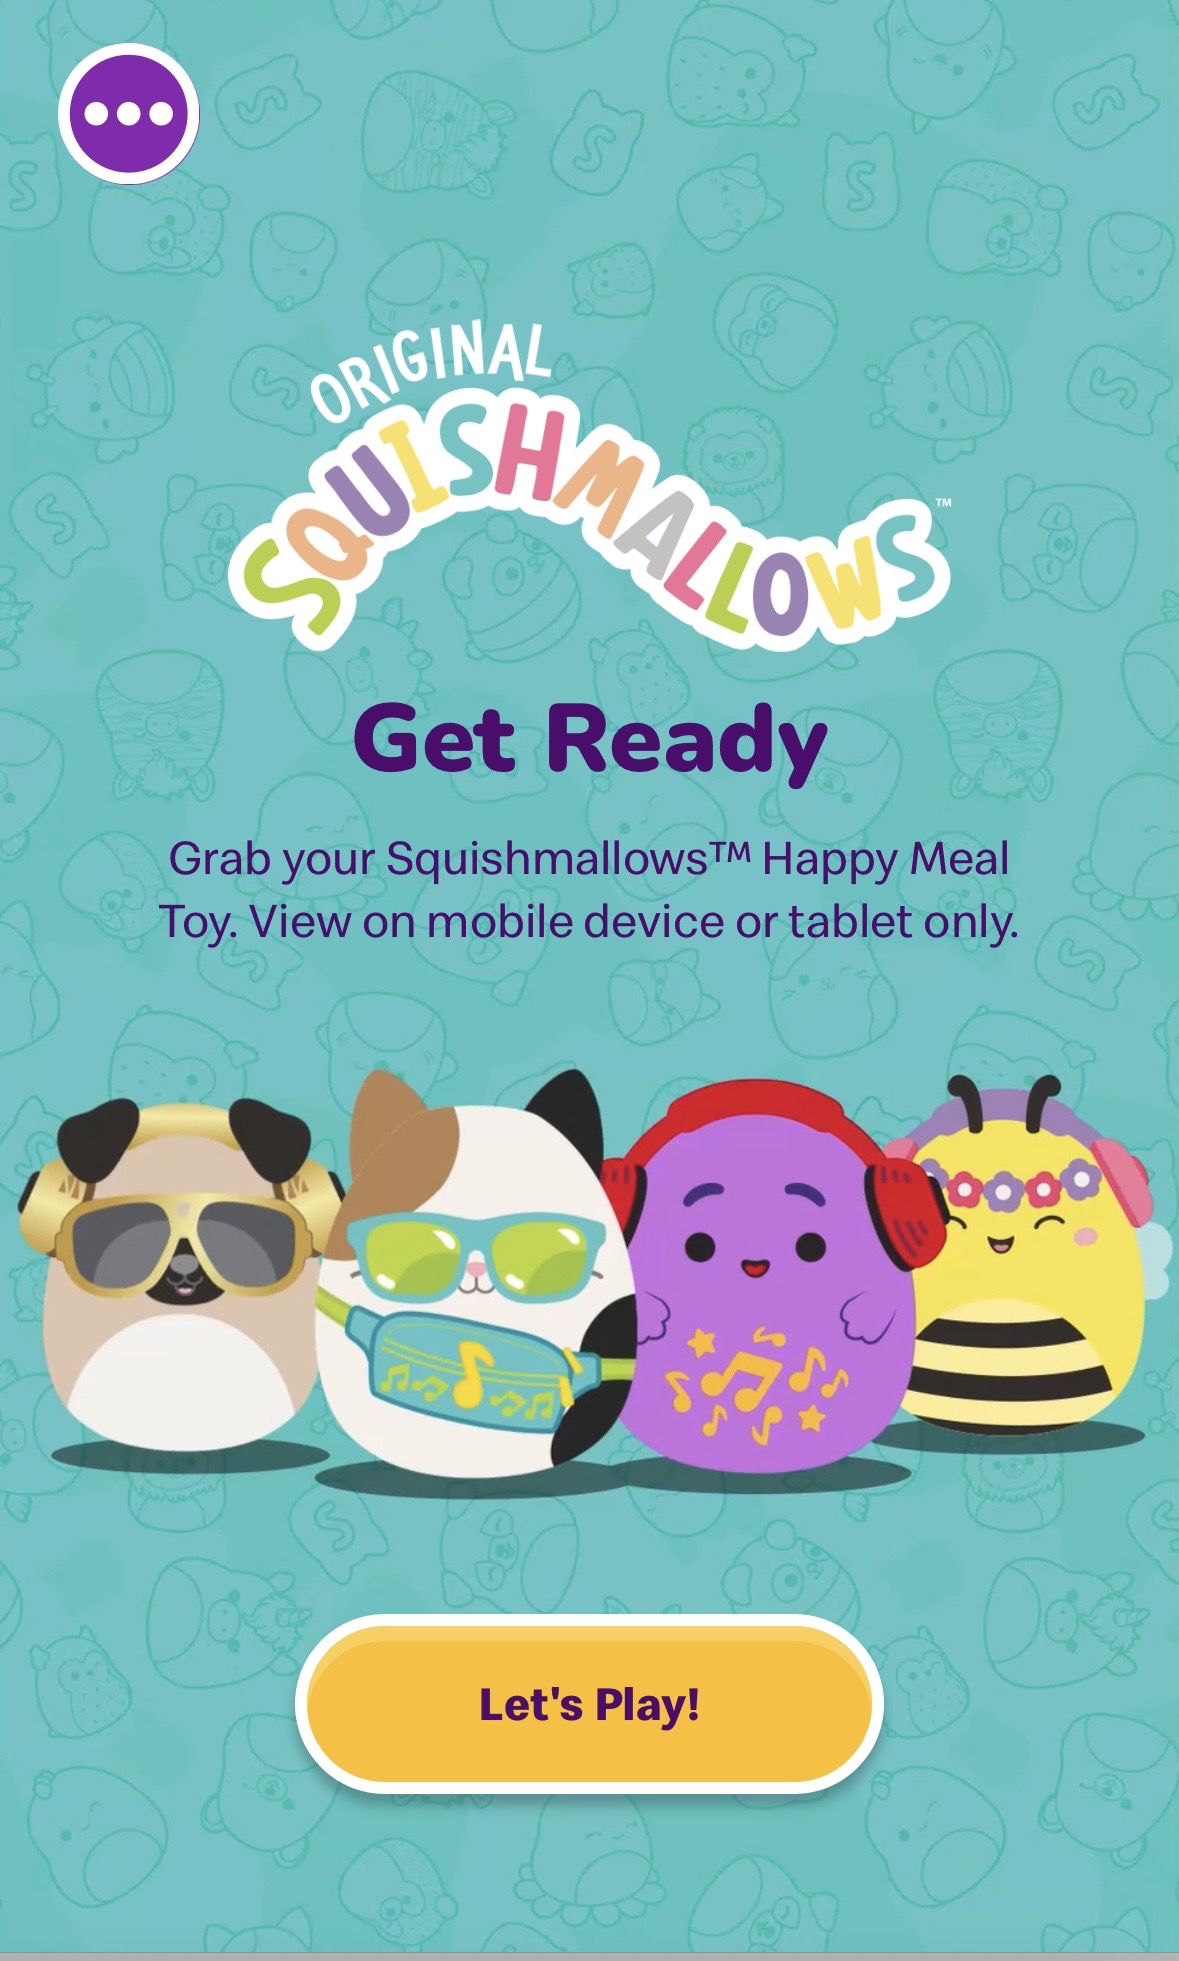 The entrance of the digital element for the Squishmallows Happy Meal with the Squishmallows logo, toys, and the text 